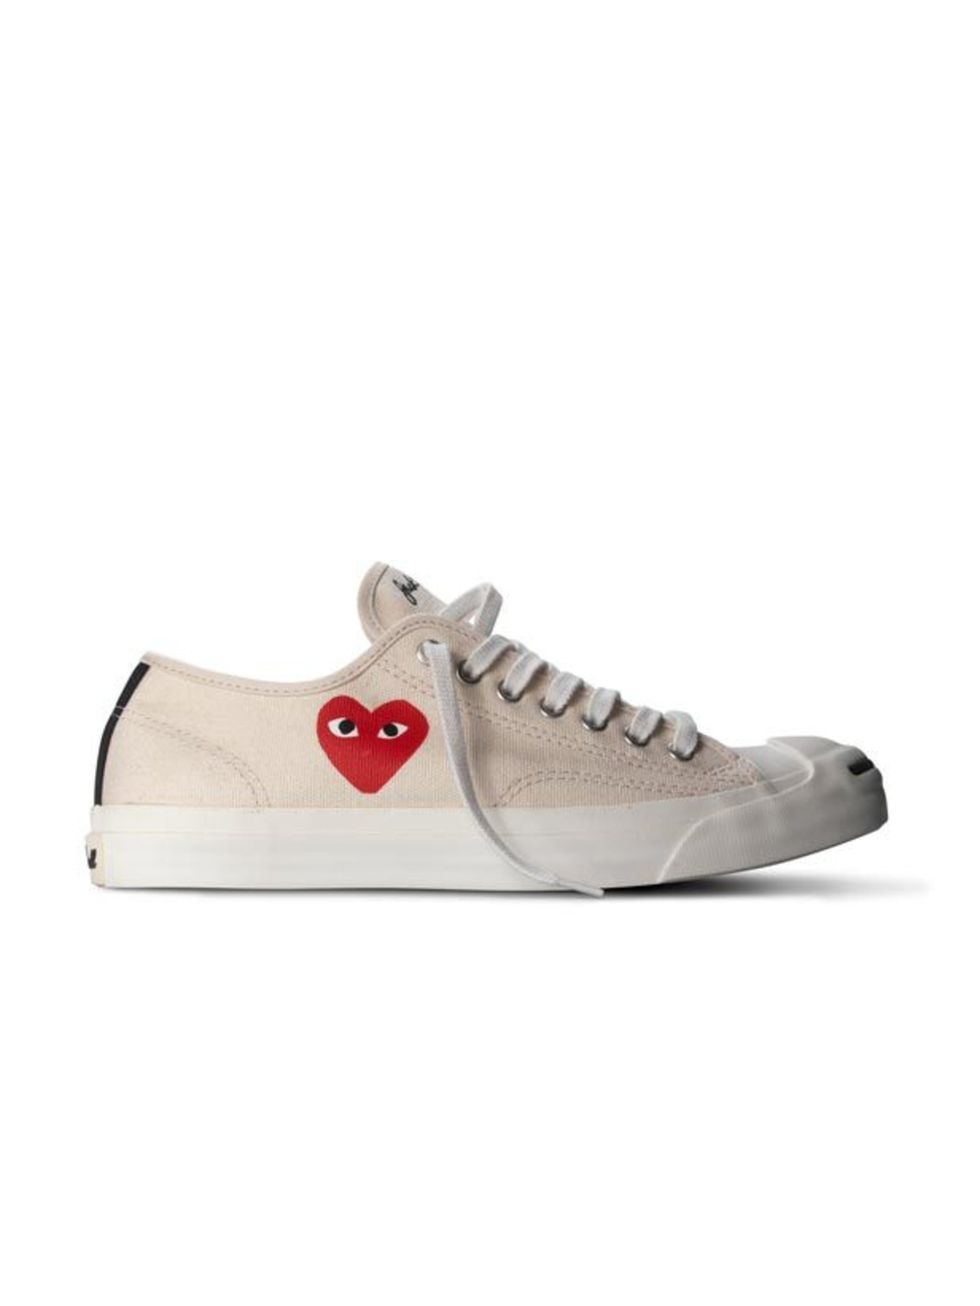 <p> </p><p> </p><p>Converse and Comme des Garcons have reunited to give the Jack Purcell style a simple yet sublime makeover with the famously cute heart print logo. We cant wait to wear this pair with chinos and denim shorts come summer... Converse x Co